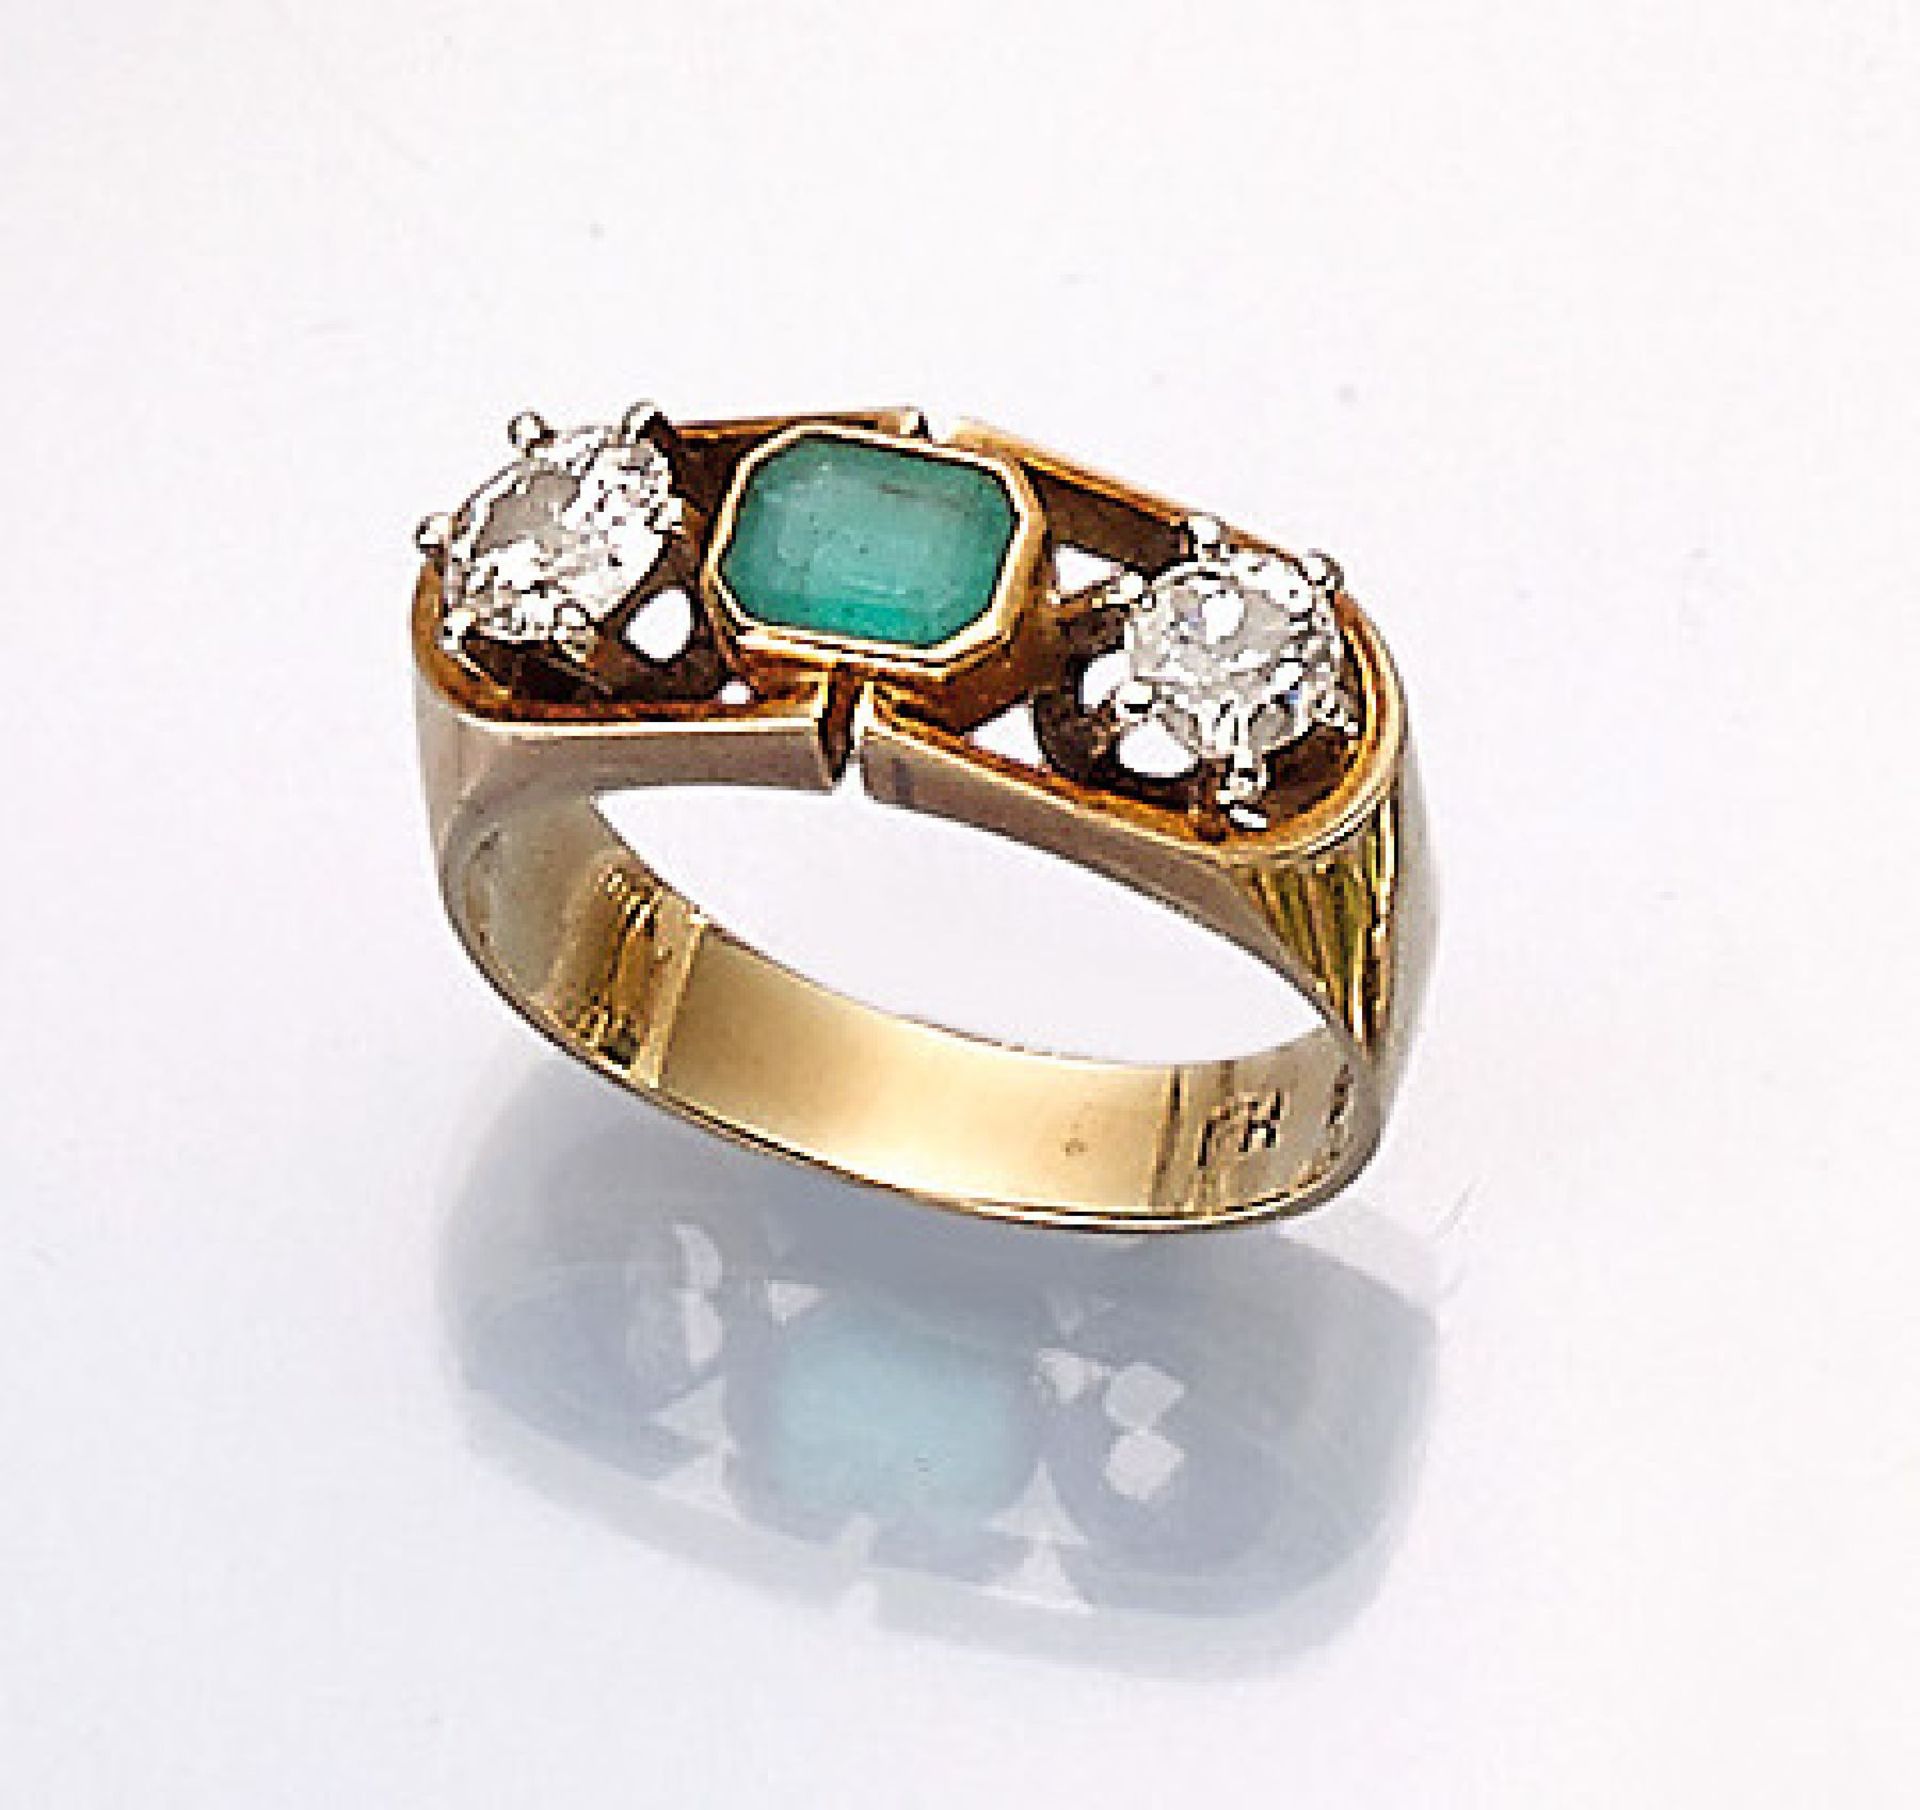 14 kt gold ring with emerald and diamonds , YG 585/000, emerald approx. 0.50 ct, 2 old cutdiamond